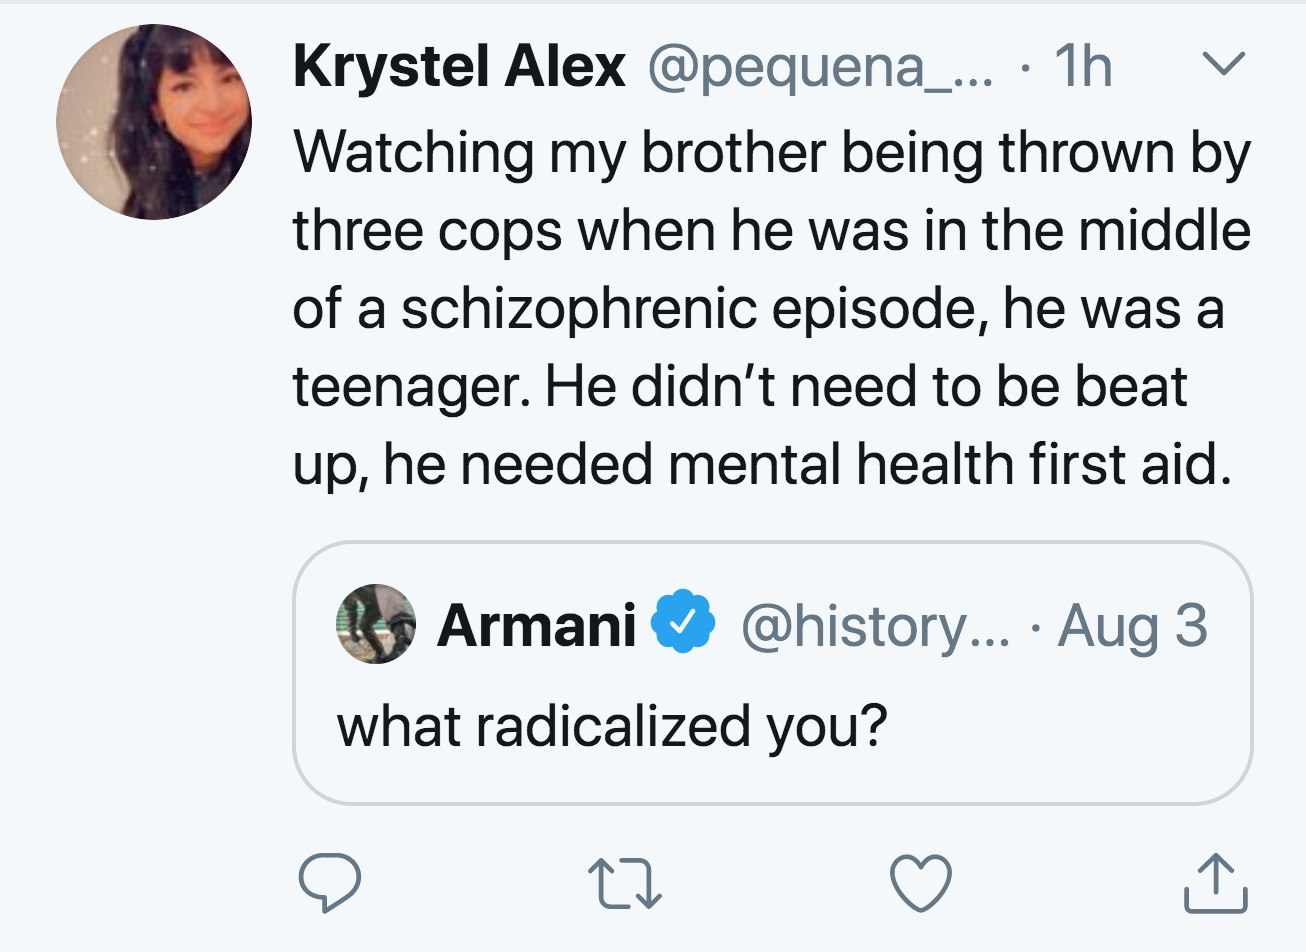 angle - V Krystel Alex ... 1h Watching my brother being thrown by three cops when he was in the middle of a schizophrenic episode, he was a teenager. He didn't need to be beat up, he needed mental health first aid. Armani ... Aug 3 what radicalized you? A